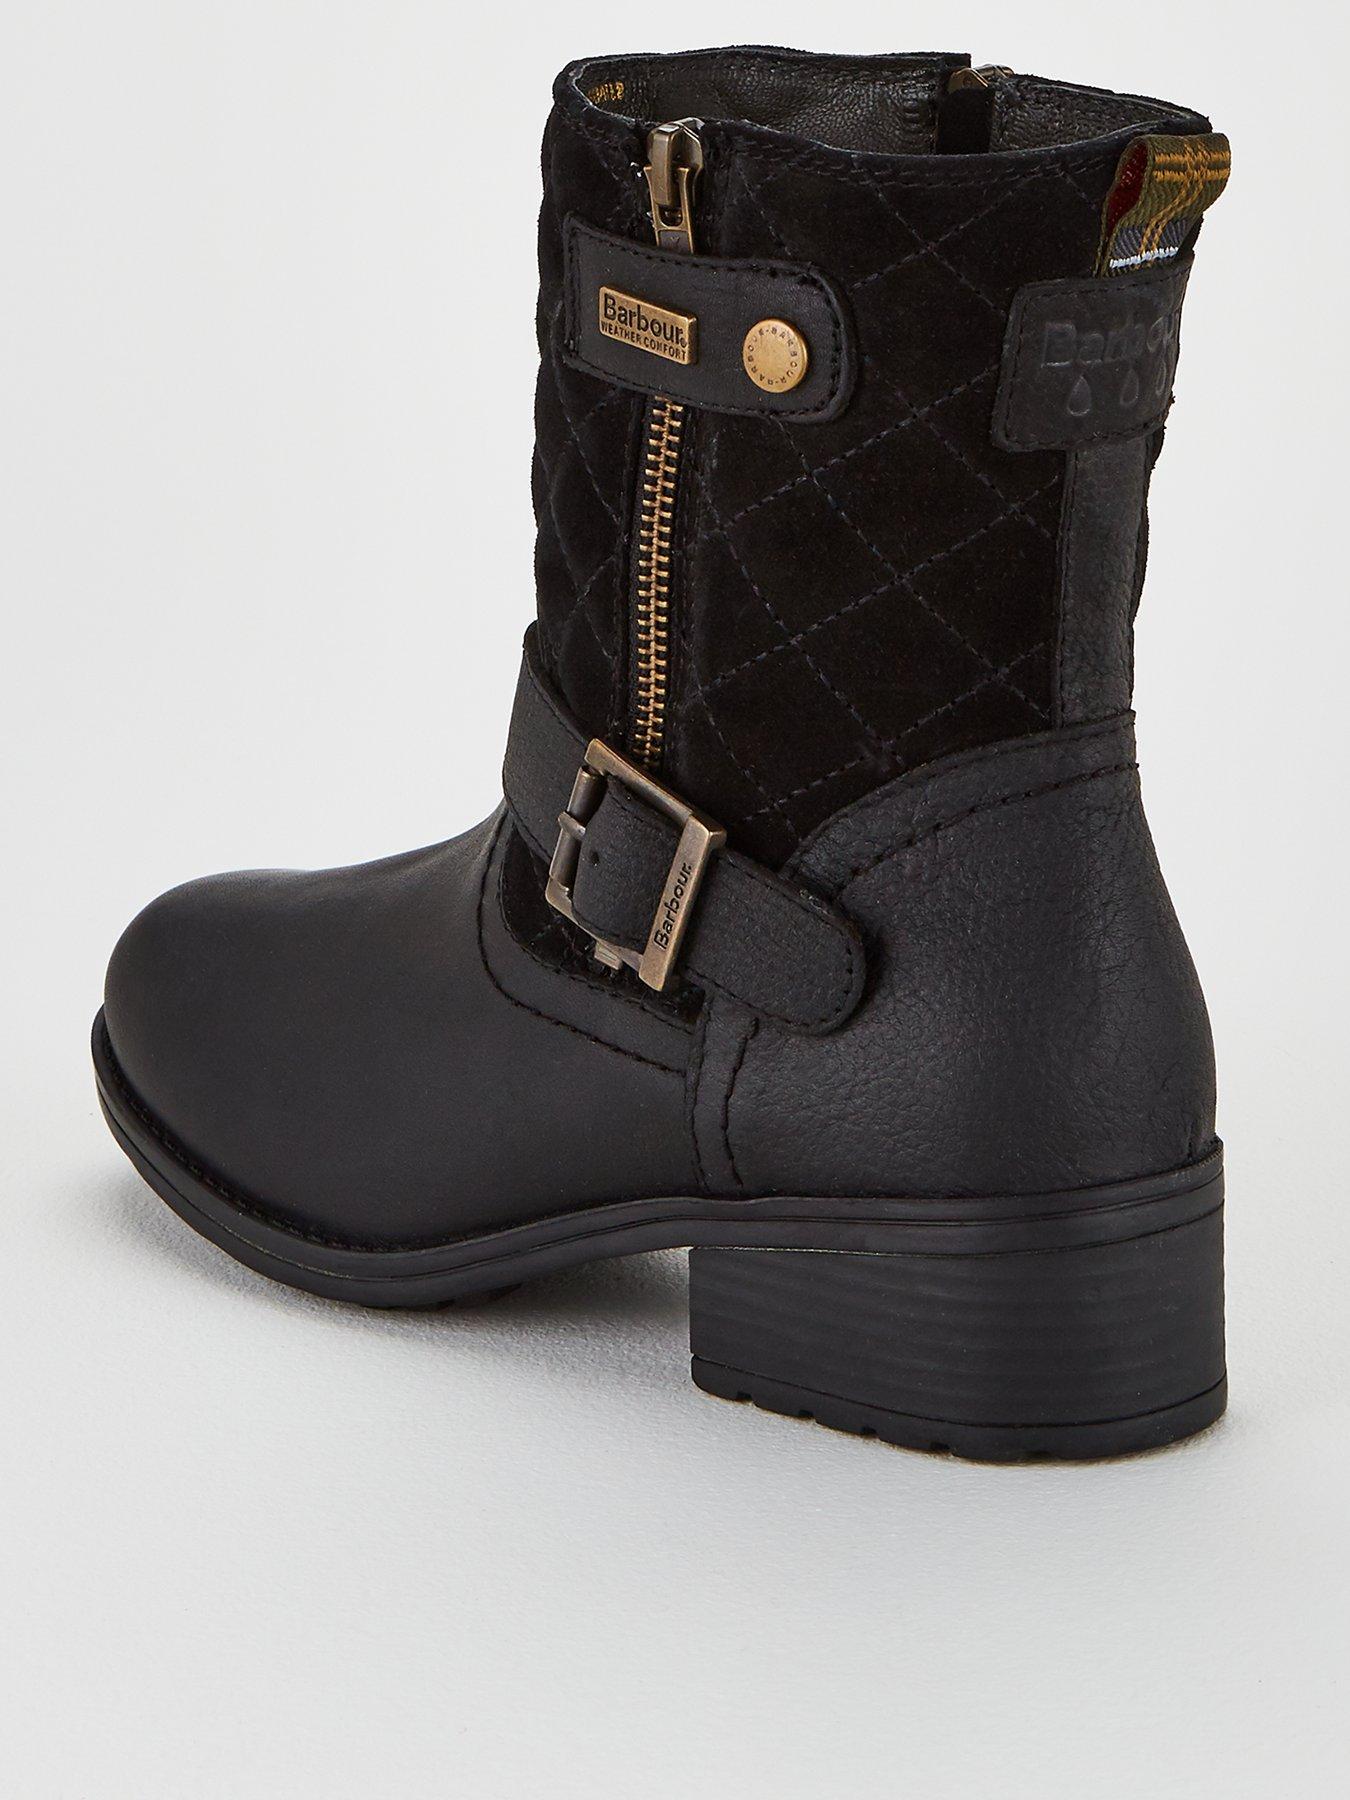 barbour boots sienna